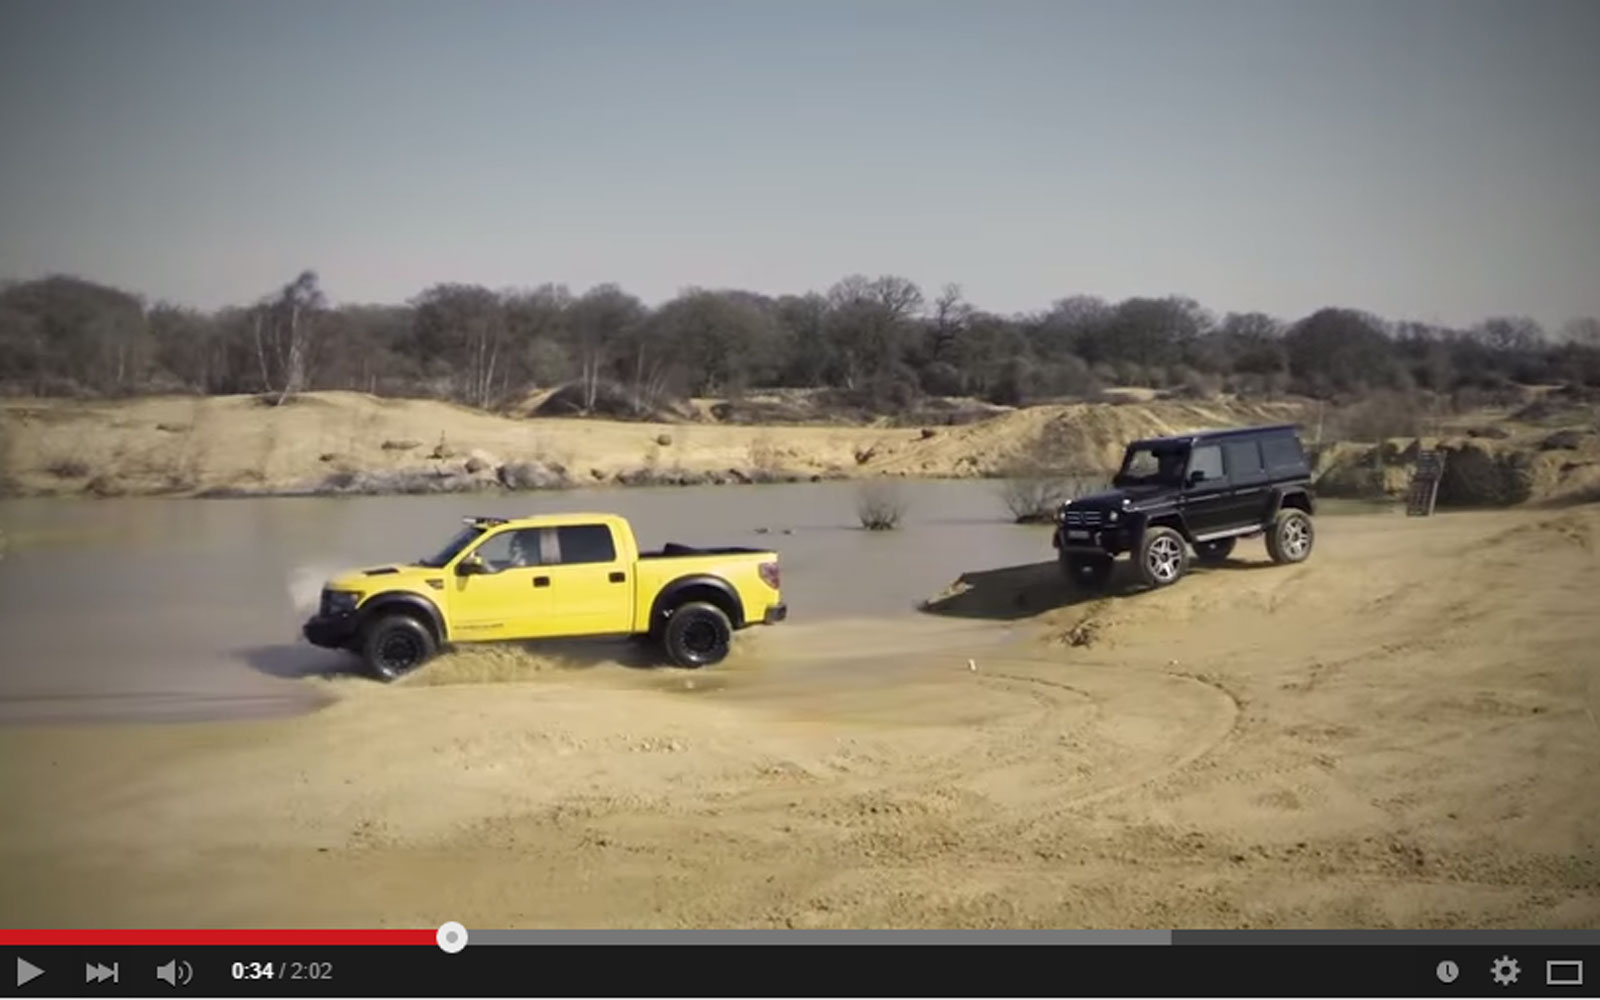 Top Gear Released A New Magnificient Video With The Raptor And The G500 On YouTube But…